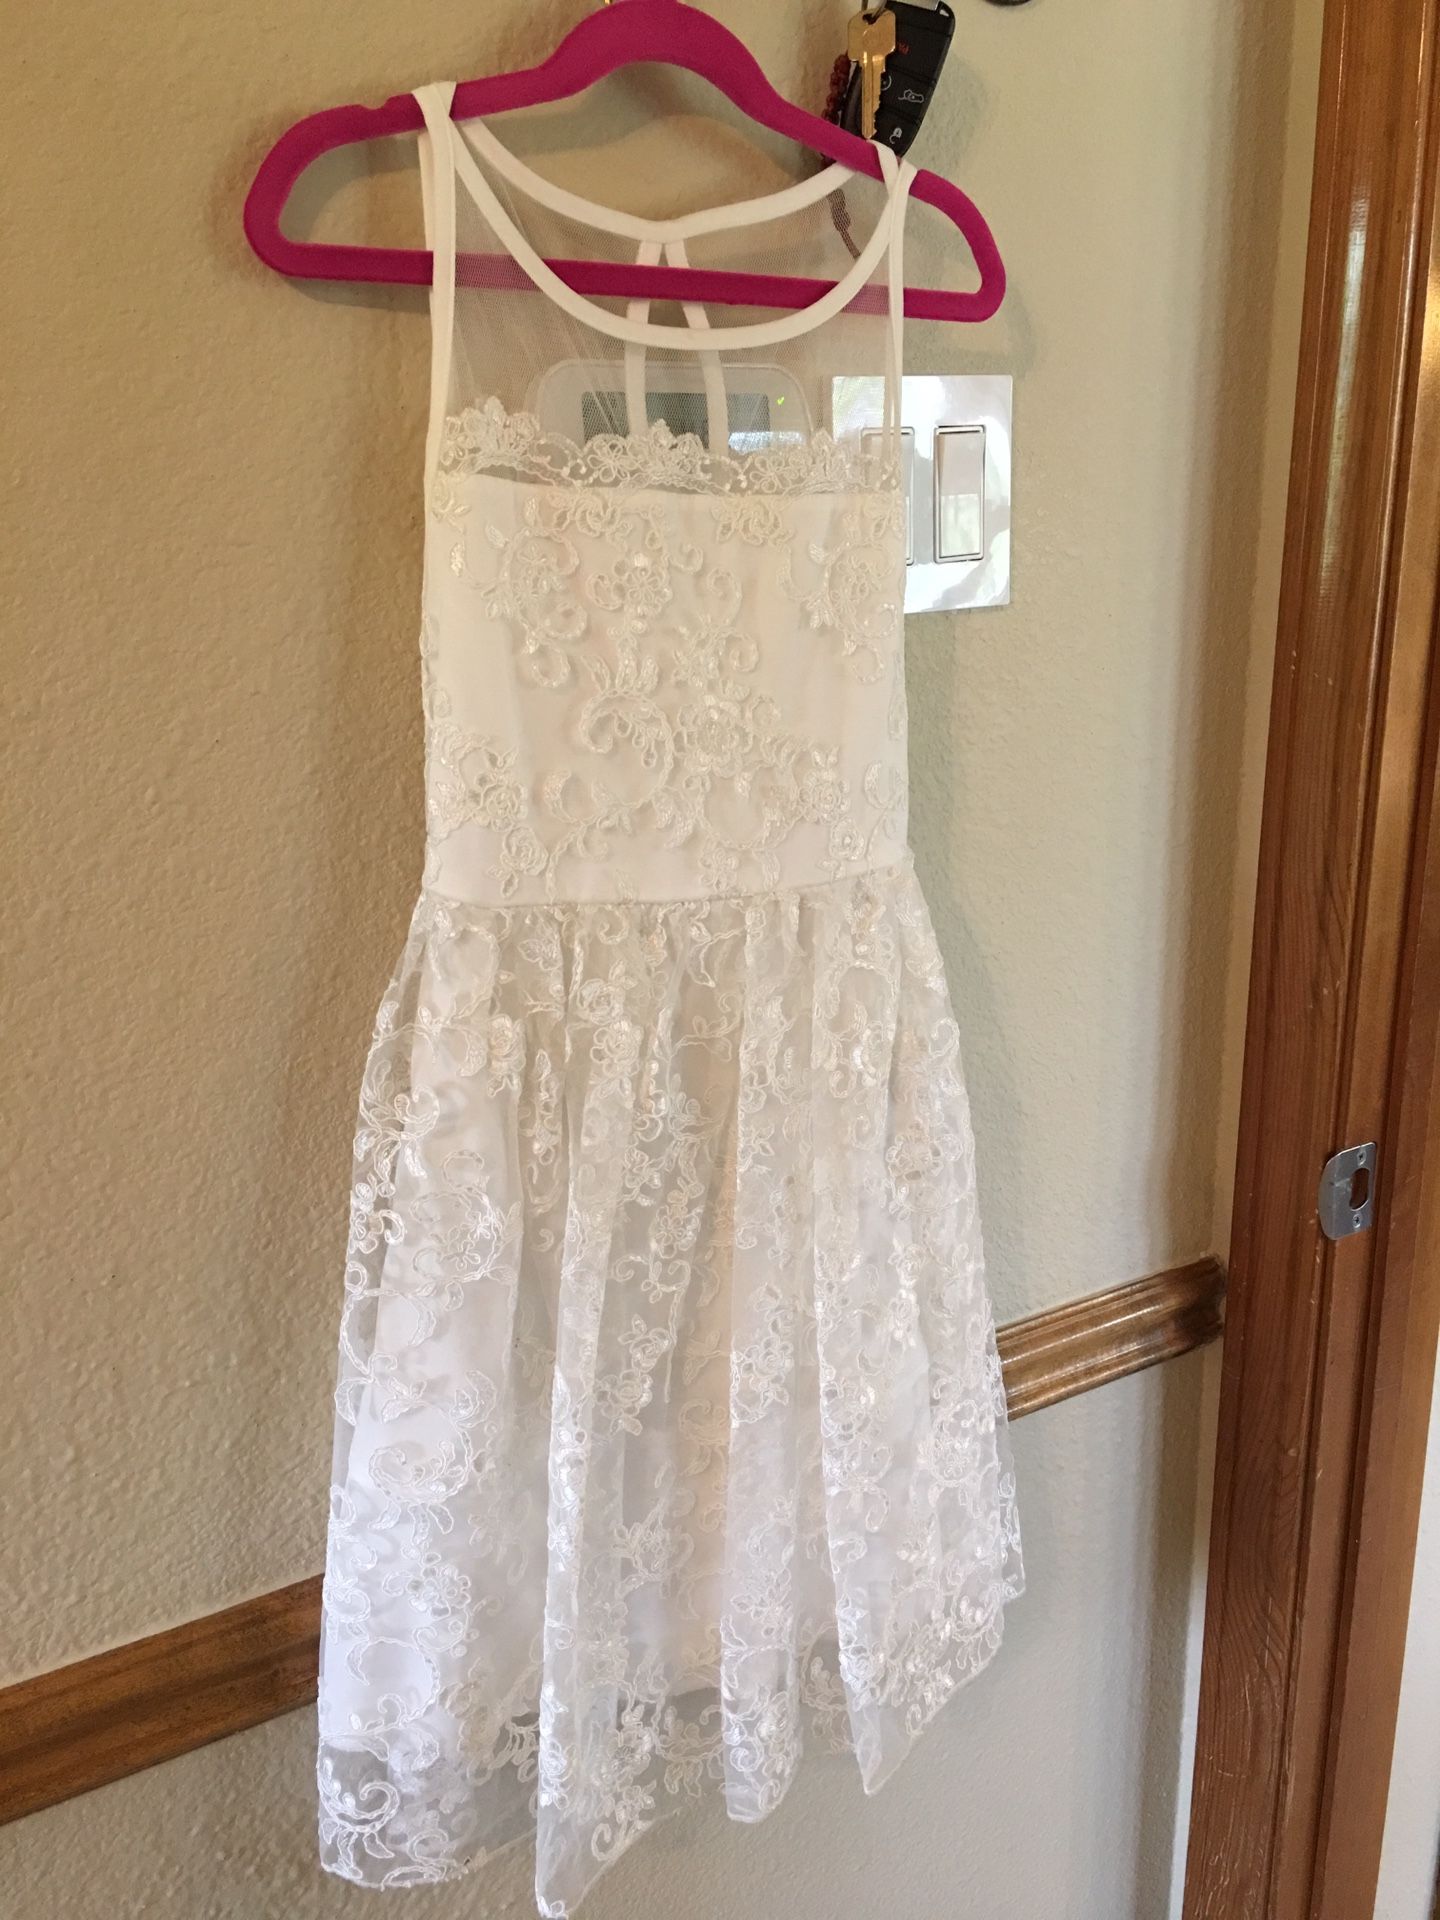 Girls White Lace Easter Dress - Size 10